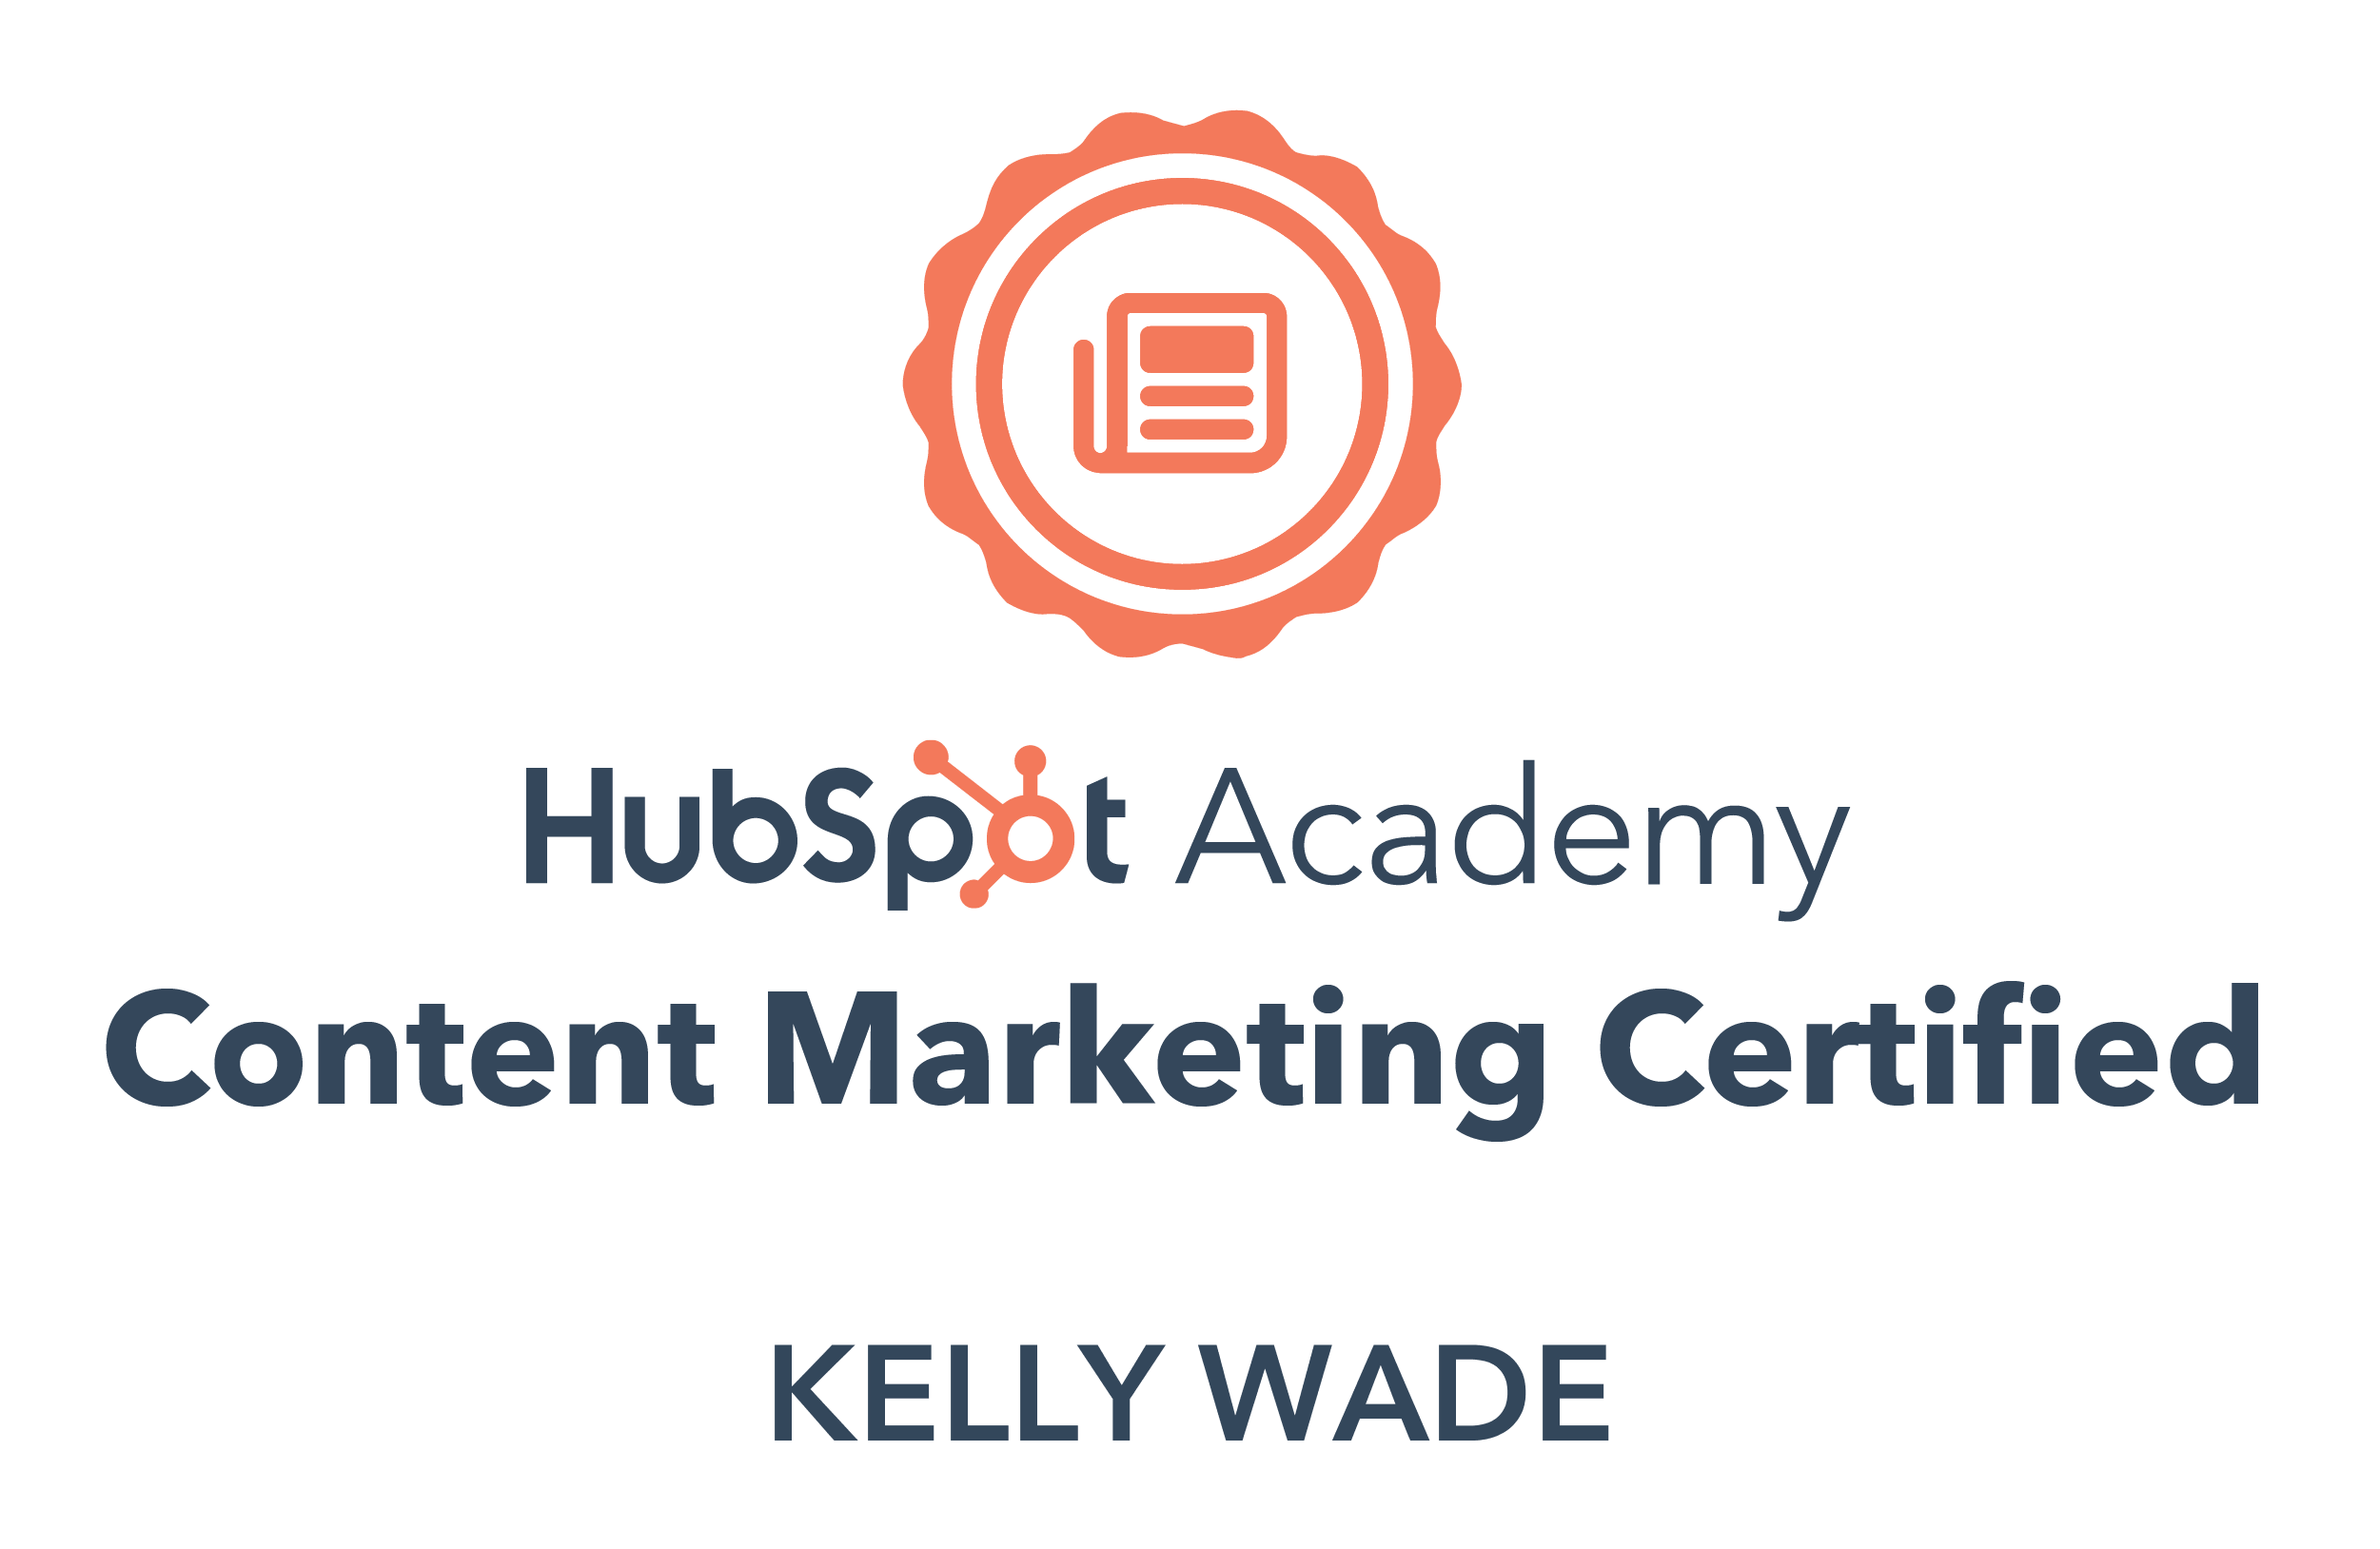 Certificate that proves Kelly has passed the HubSpot Academy Content Marketing certification